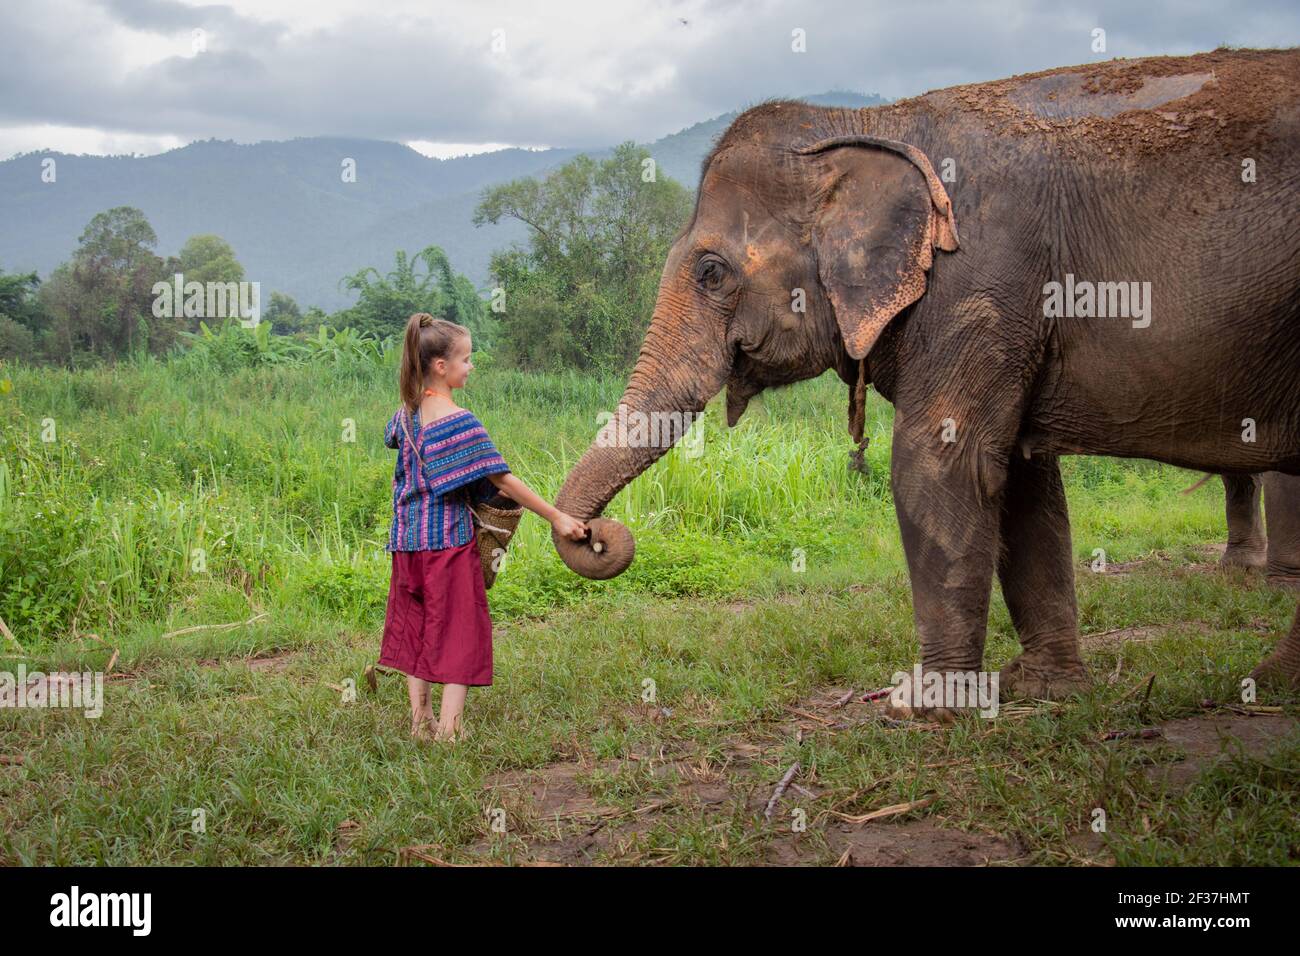 North of Chiang Mai, Thailand. A girl is feeding an elephant with sugar cane in a sanctuary for old elephants. Stock Photo